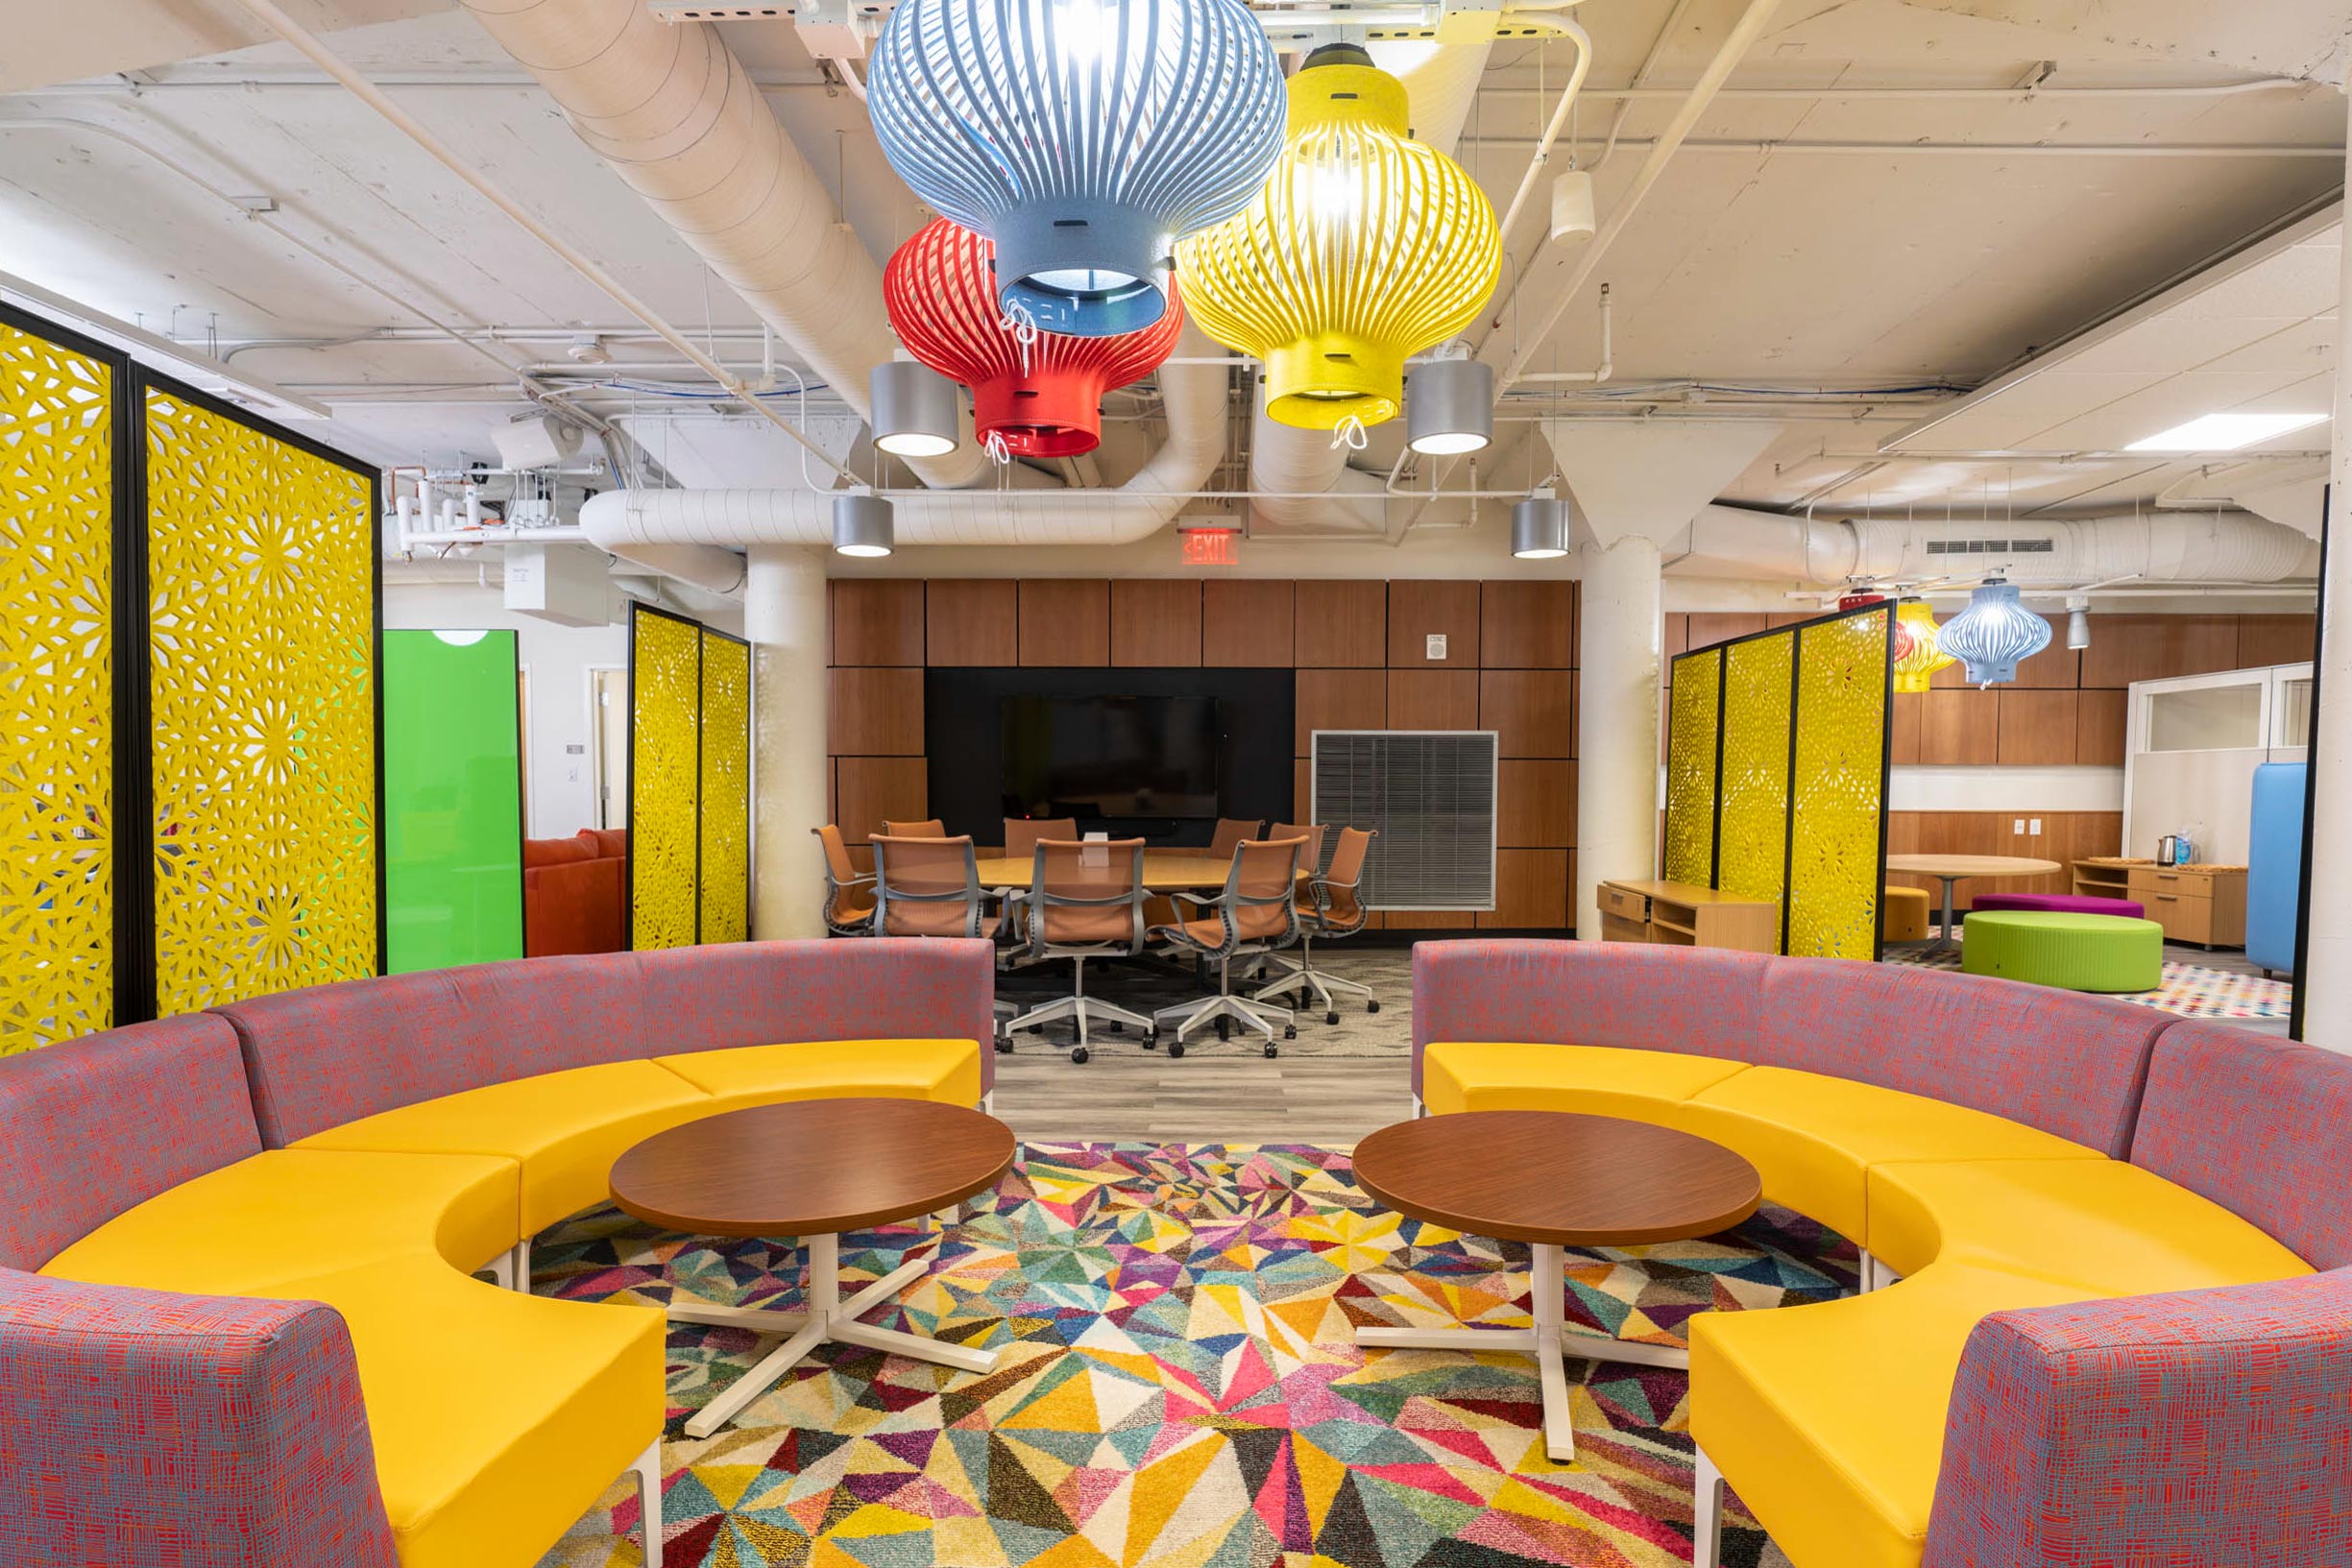 Colorful, comfortable furnishings in the new Multicultural Student Center